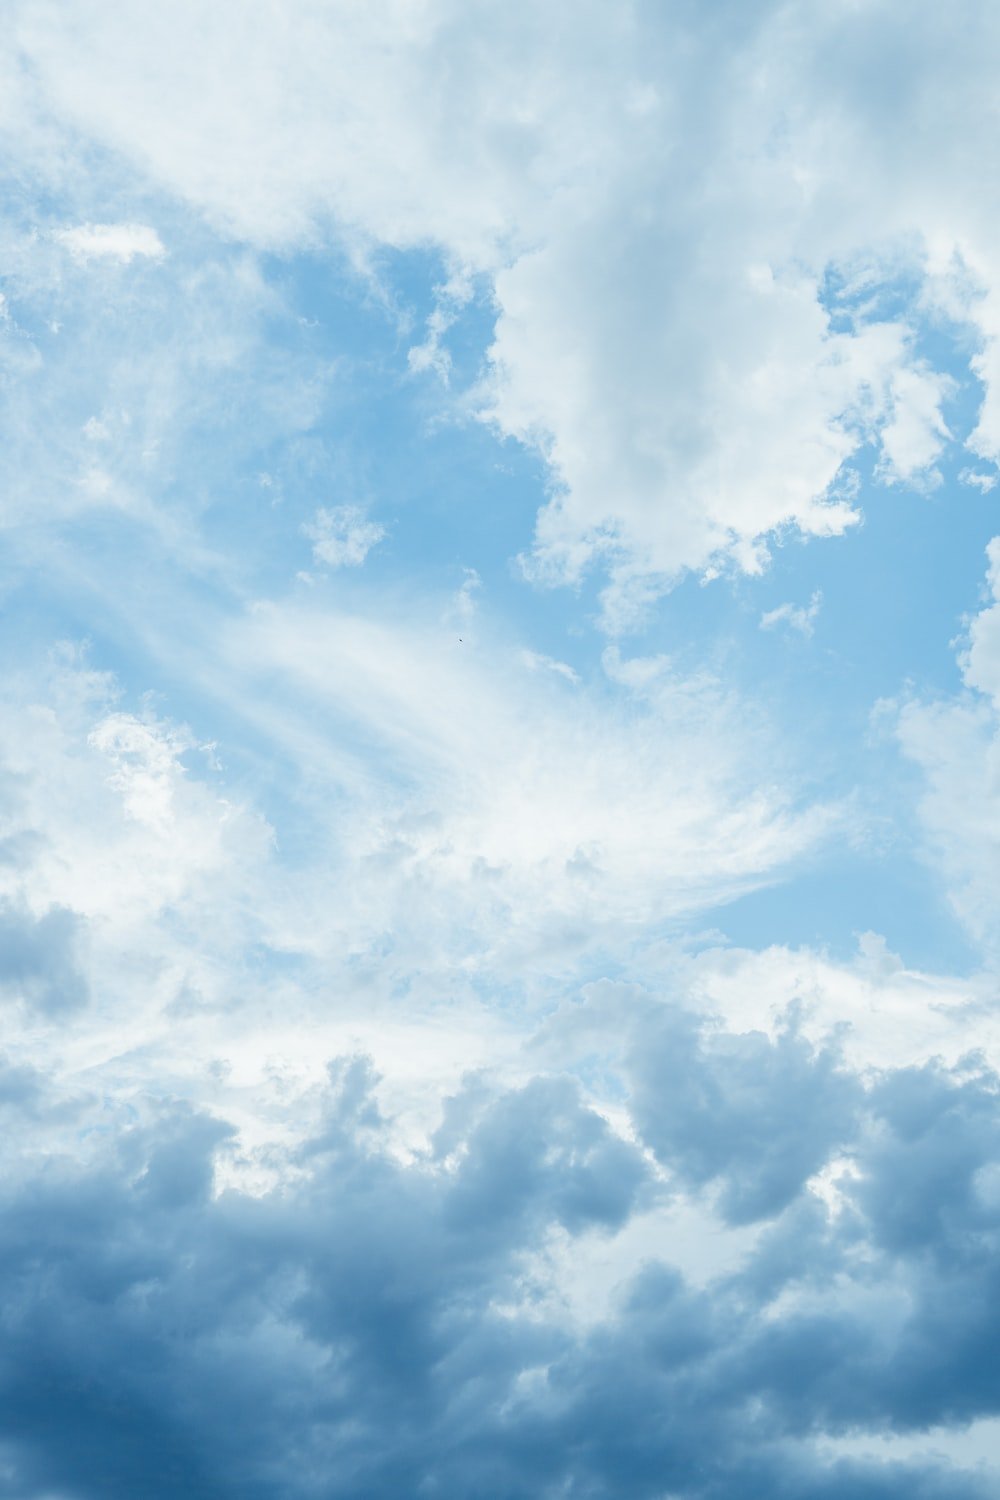 Clouds Wallpaper Picture. Download